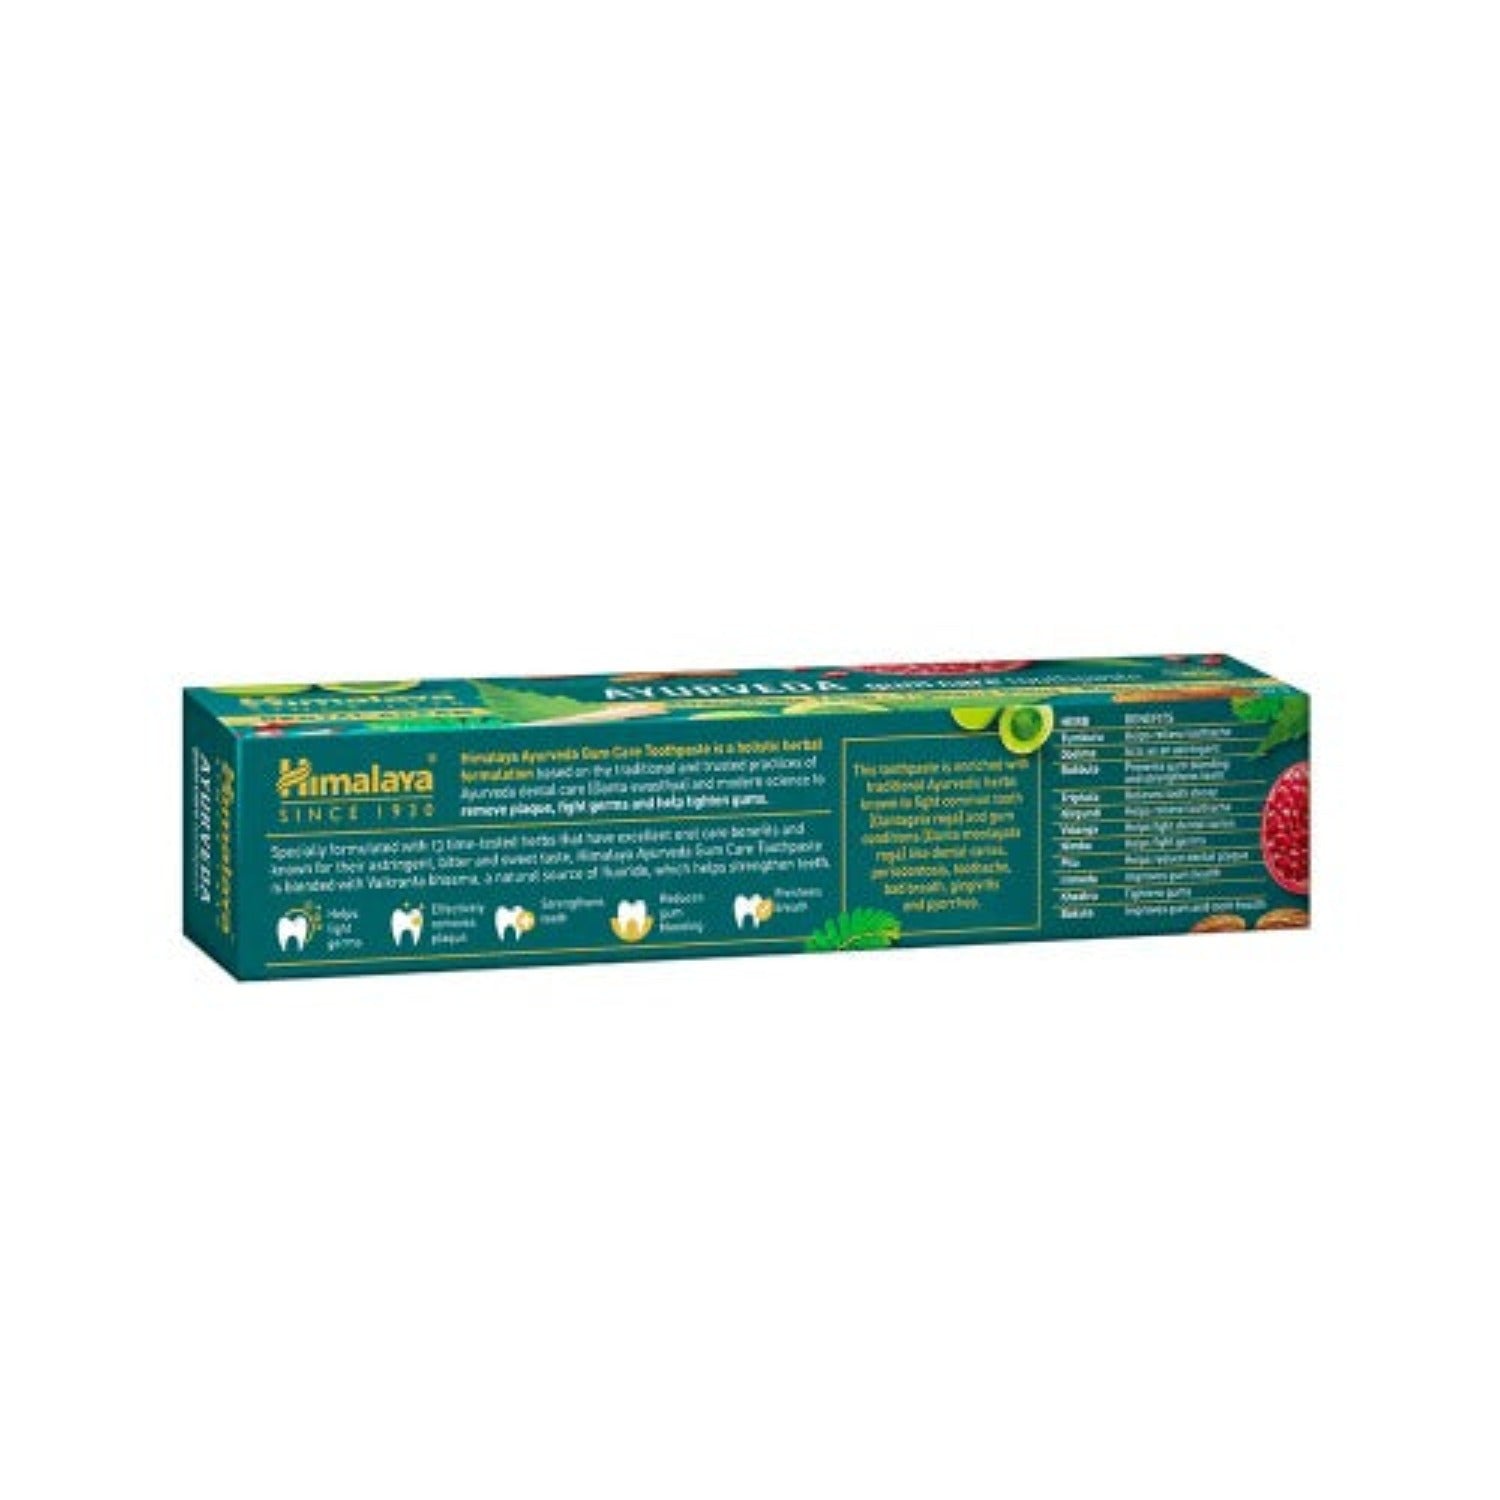 Himalaya Herbal Ayurvedic Ayurveda Gum Care Toothpaste Tightens Gums,Strengthens Teeth And Removes Plaque Dental Cream